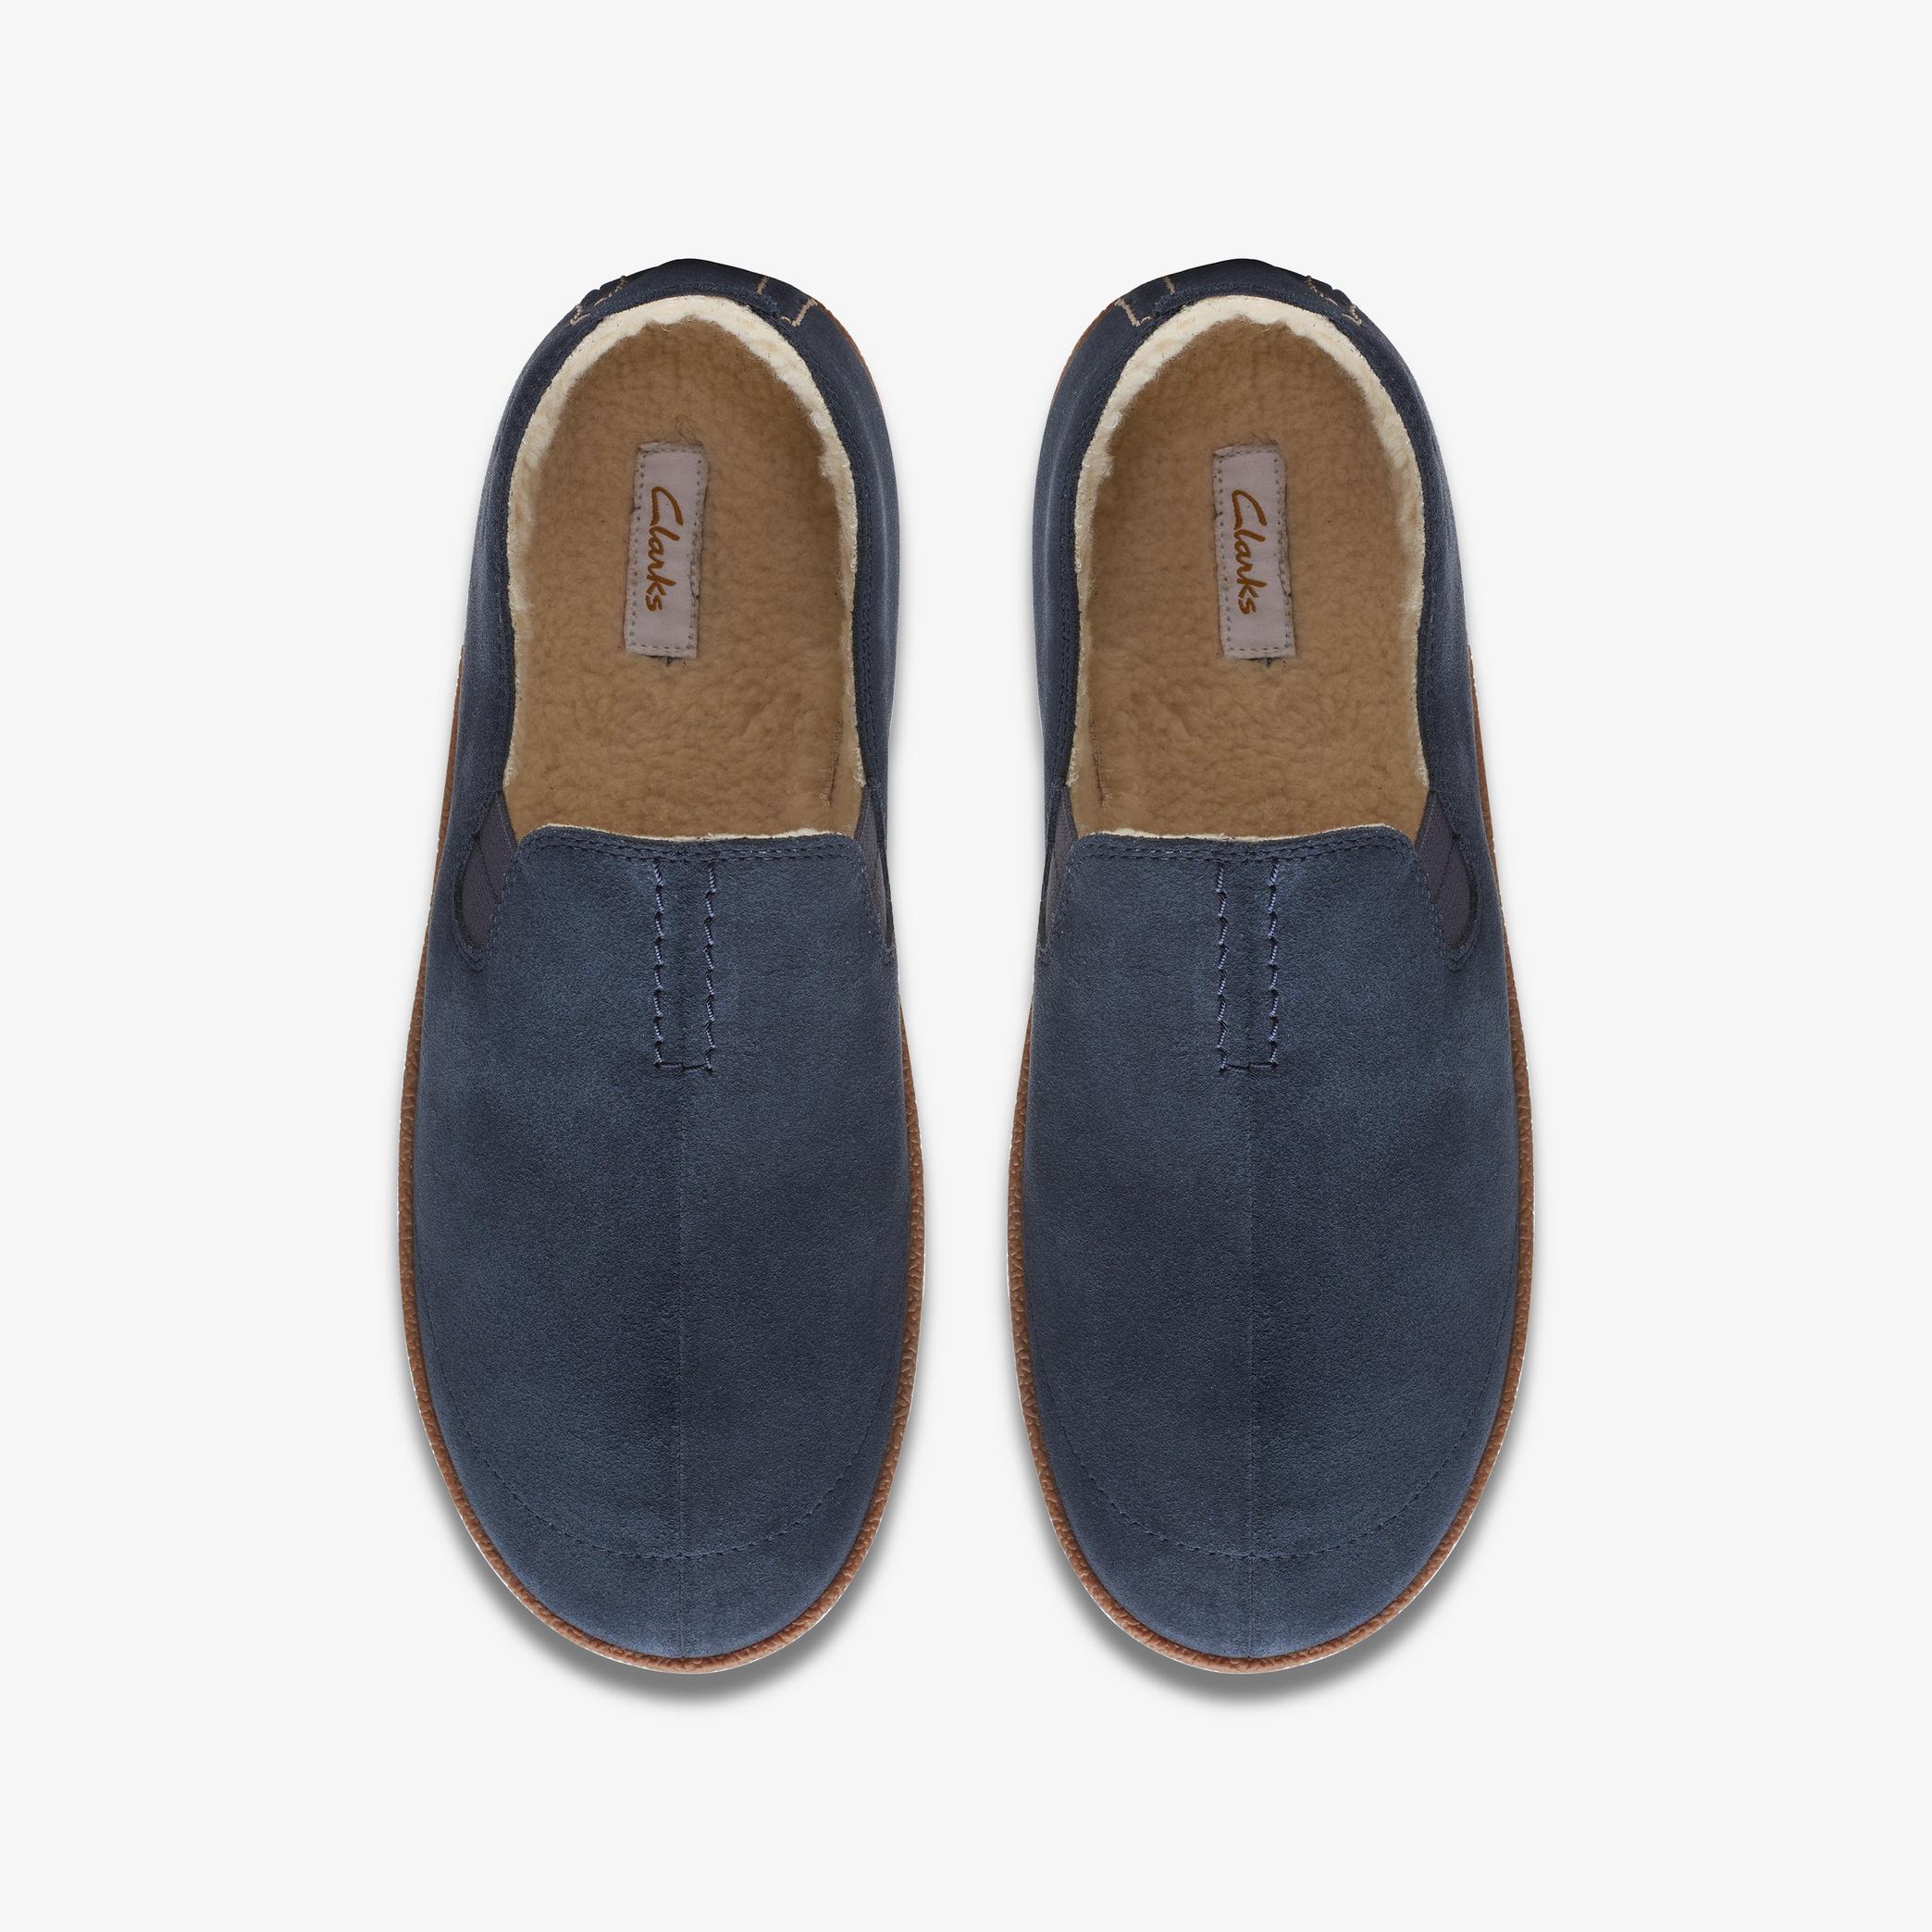 Home Mocc Navy Suede Slippers, view 6 of 6